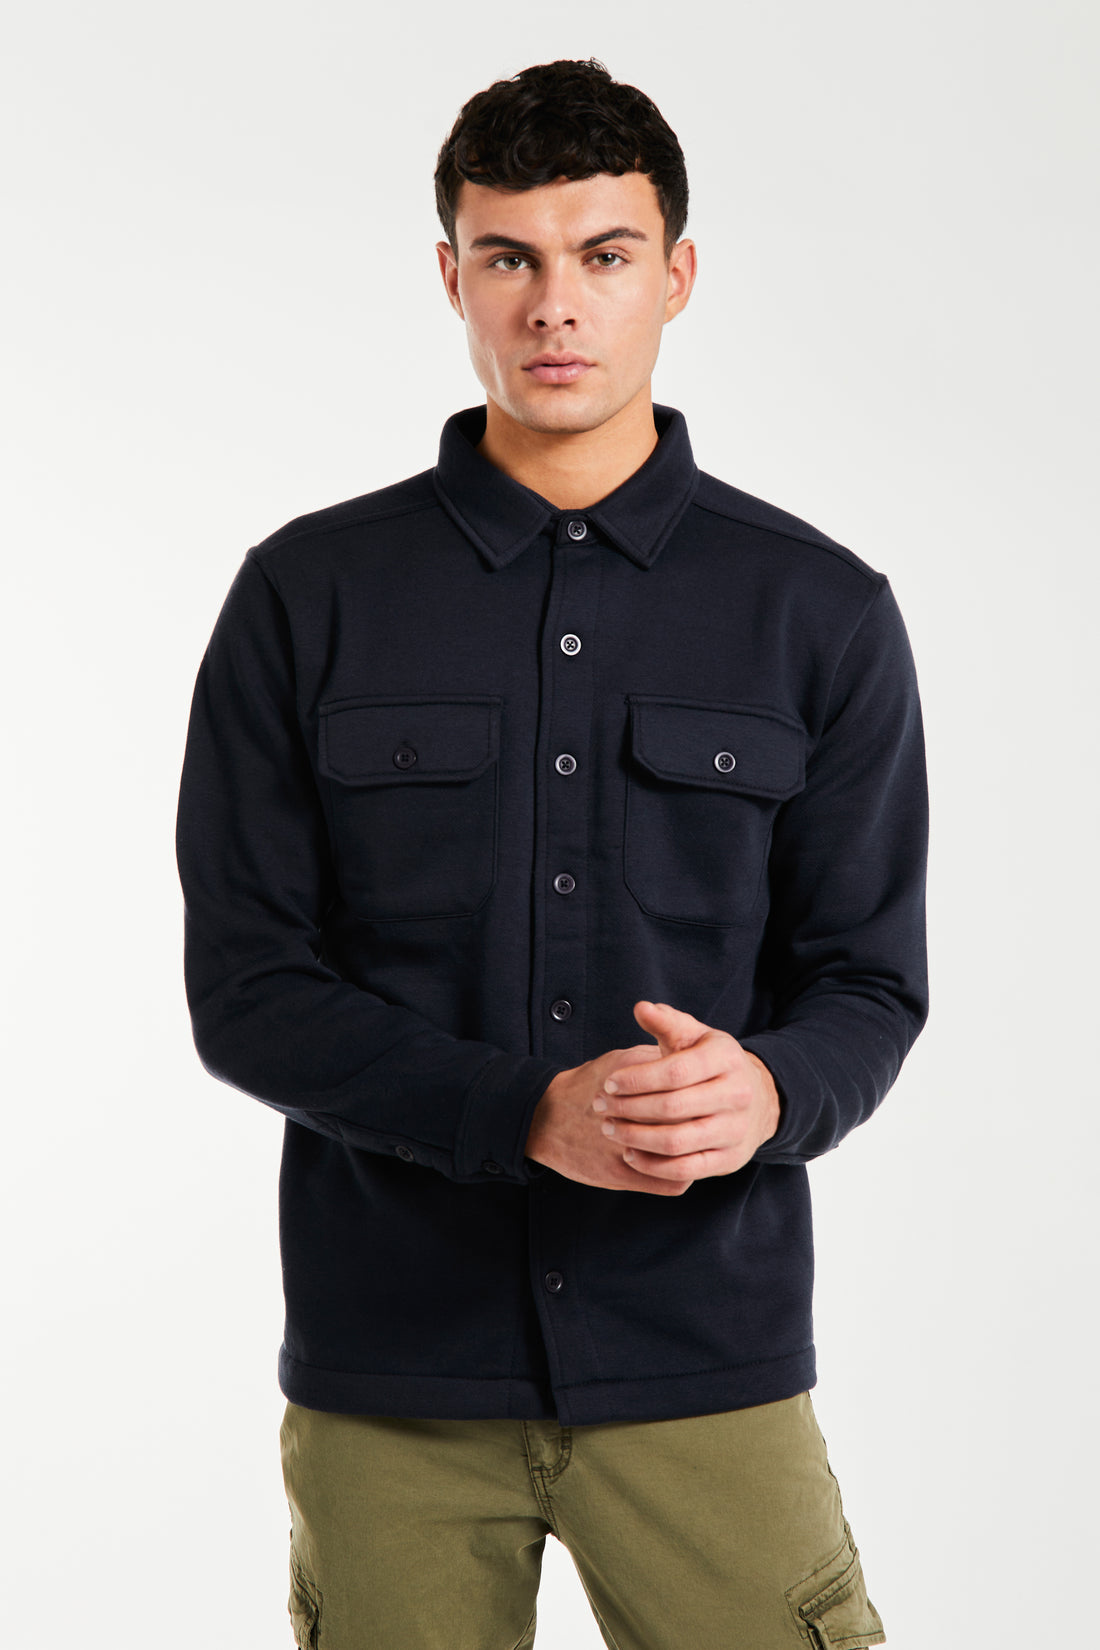 Model wearing dark navy blue overshirt with buttons